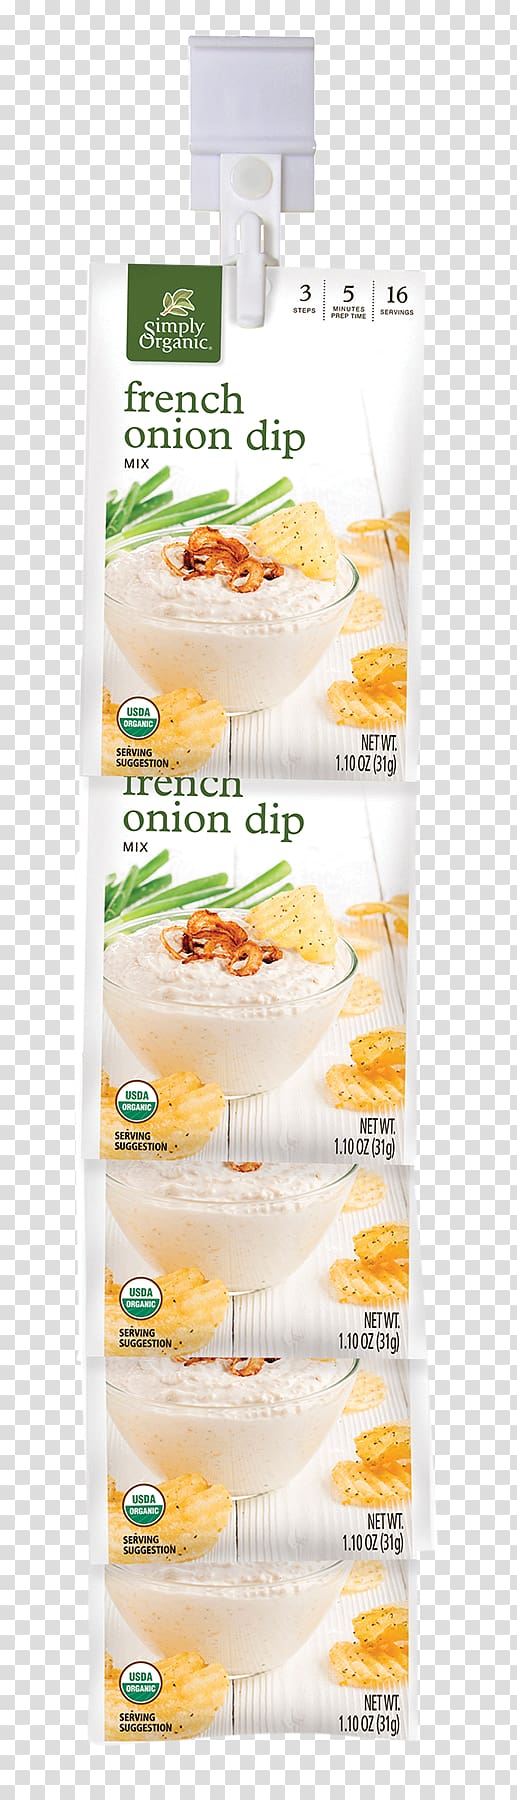 French onion dip Organic food Ranch dressing Chipotle Mexican Grill, Organic Product transparent background PNG clipart